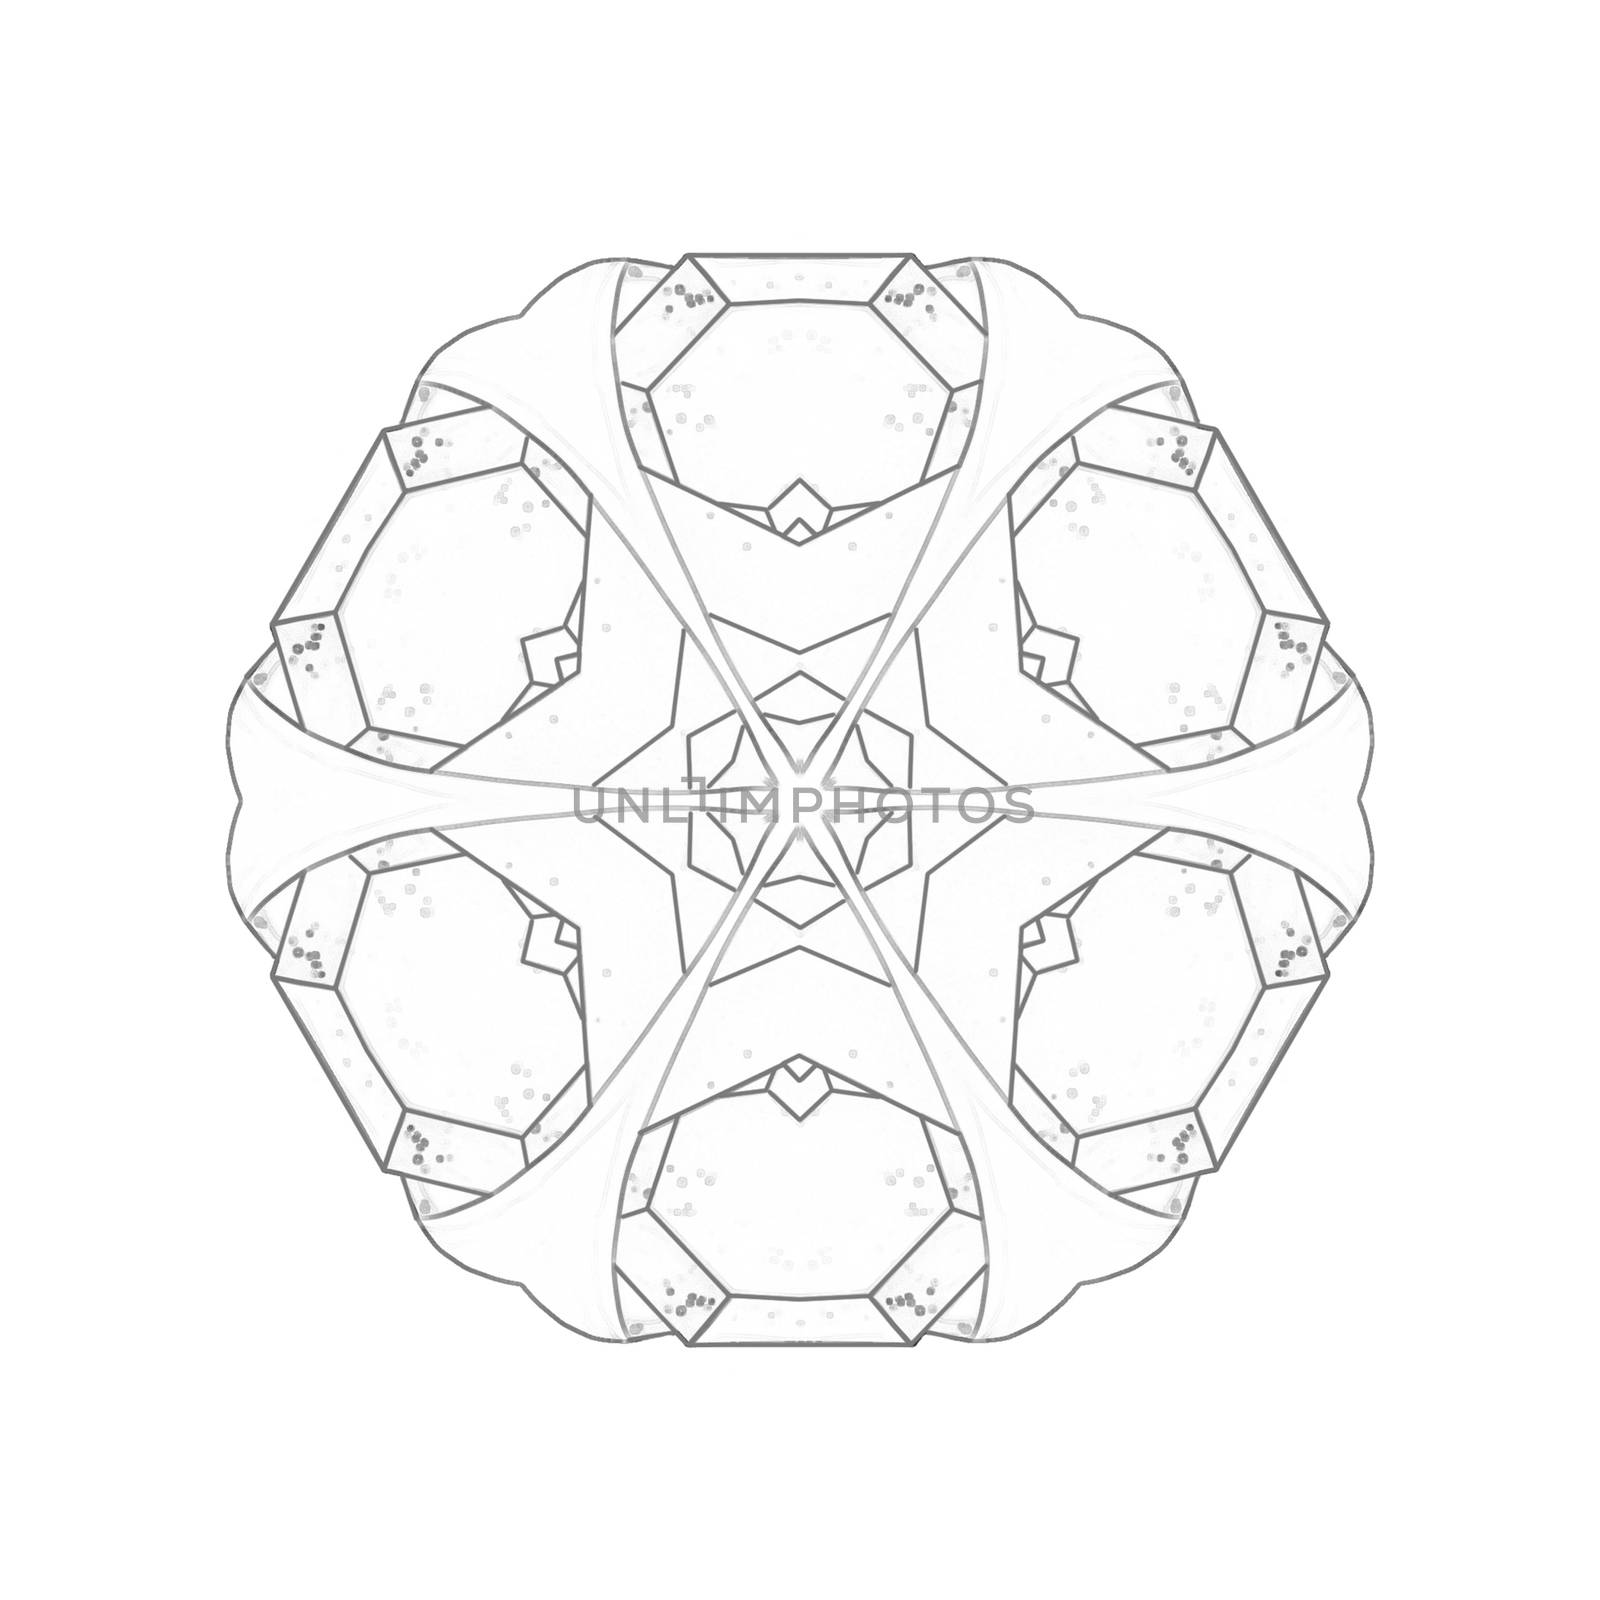 Illustration: Coloring Book Series: Pack of Diamonds Flower. Soft line. Print it and bring it to Life with Color! Fantastic Outline / Sketch / Line Art Design. by NextMars